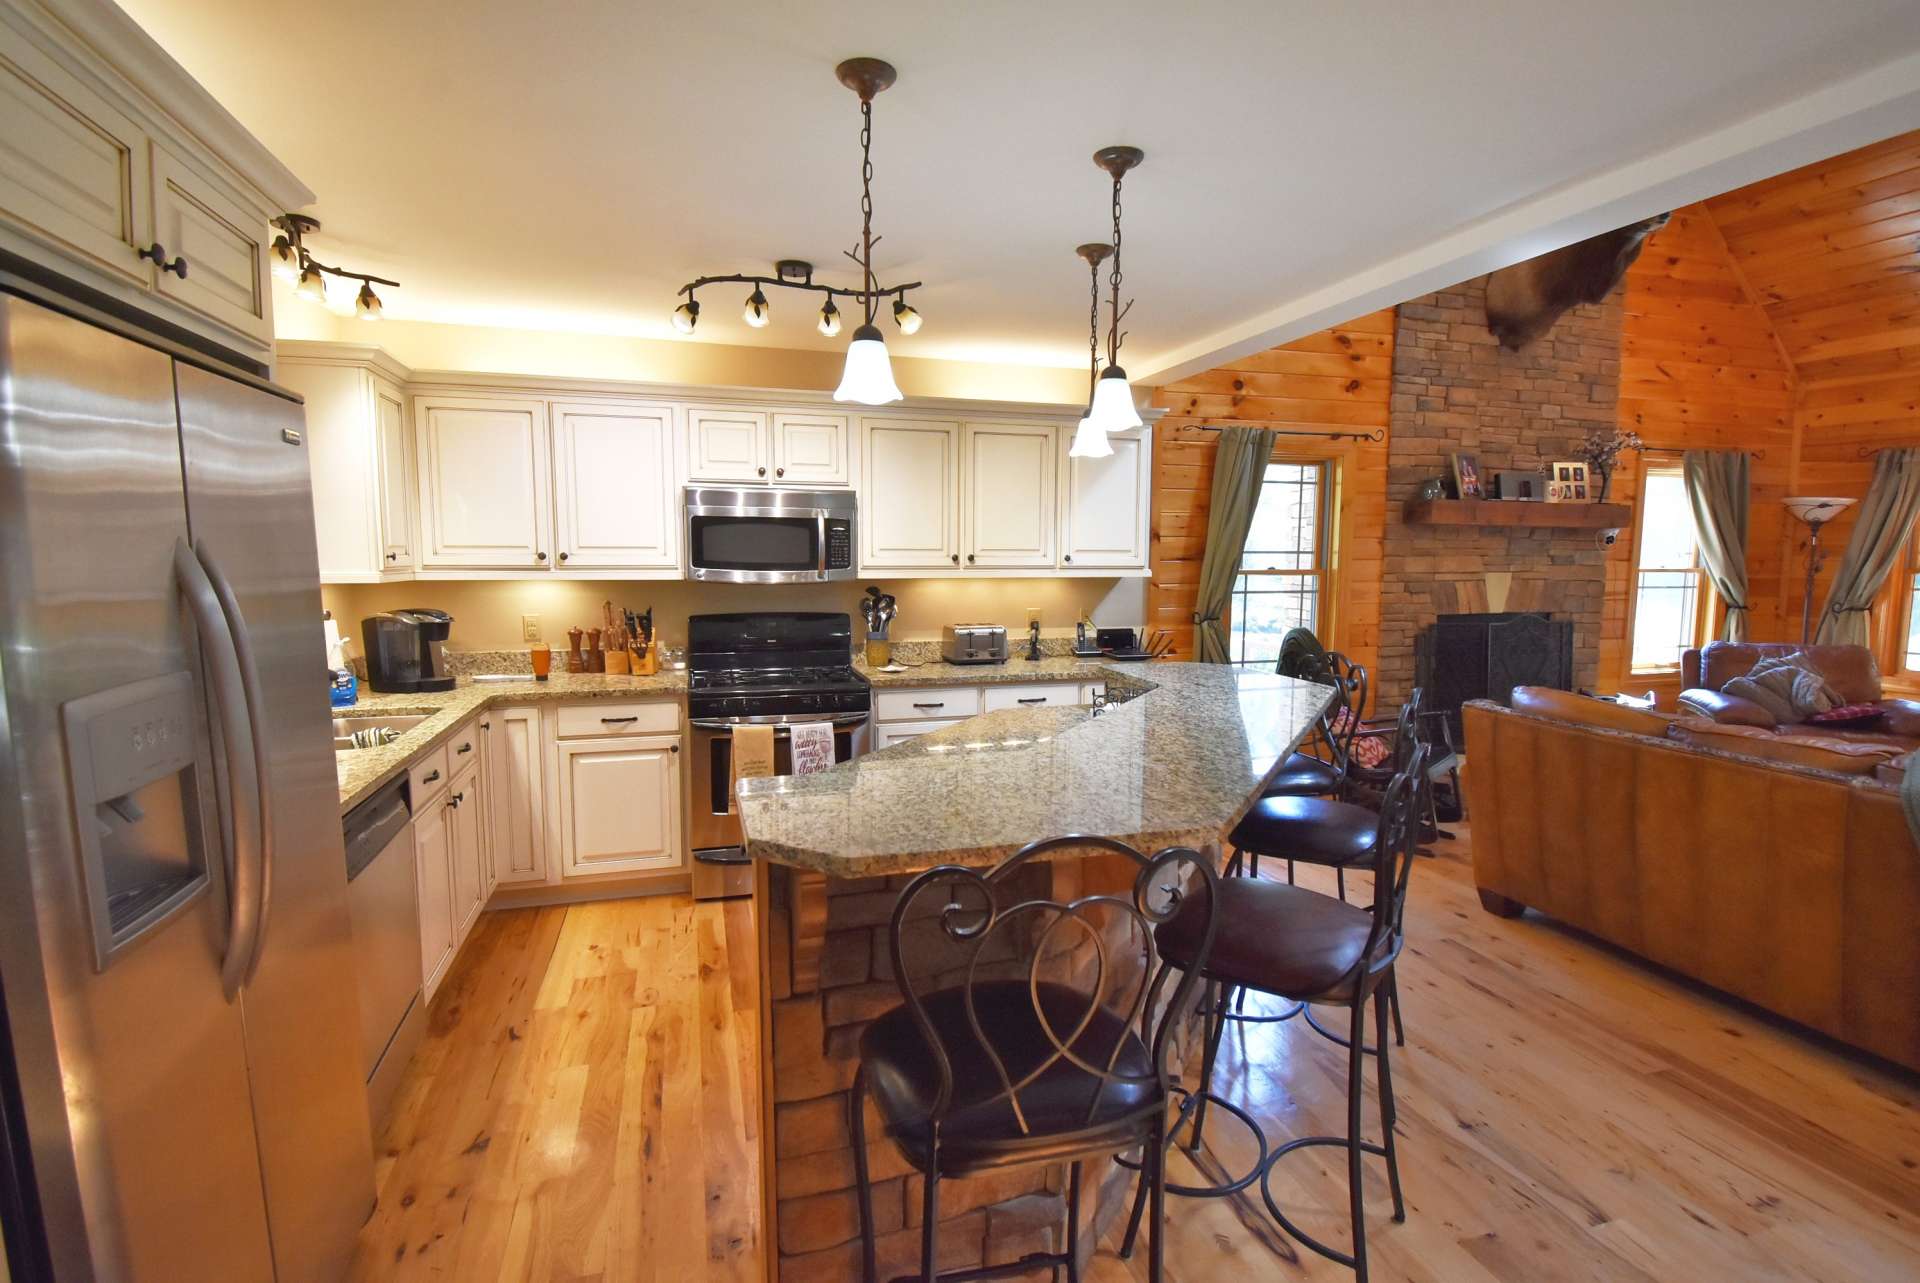 A gracious kitchen with off-white cabinets brightens the cabin and wood floors gleam with reflected light. The island seats four, and the living room is large enough to add a table if desired.